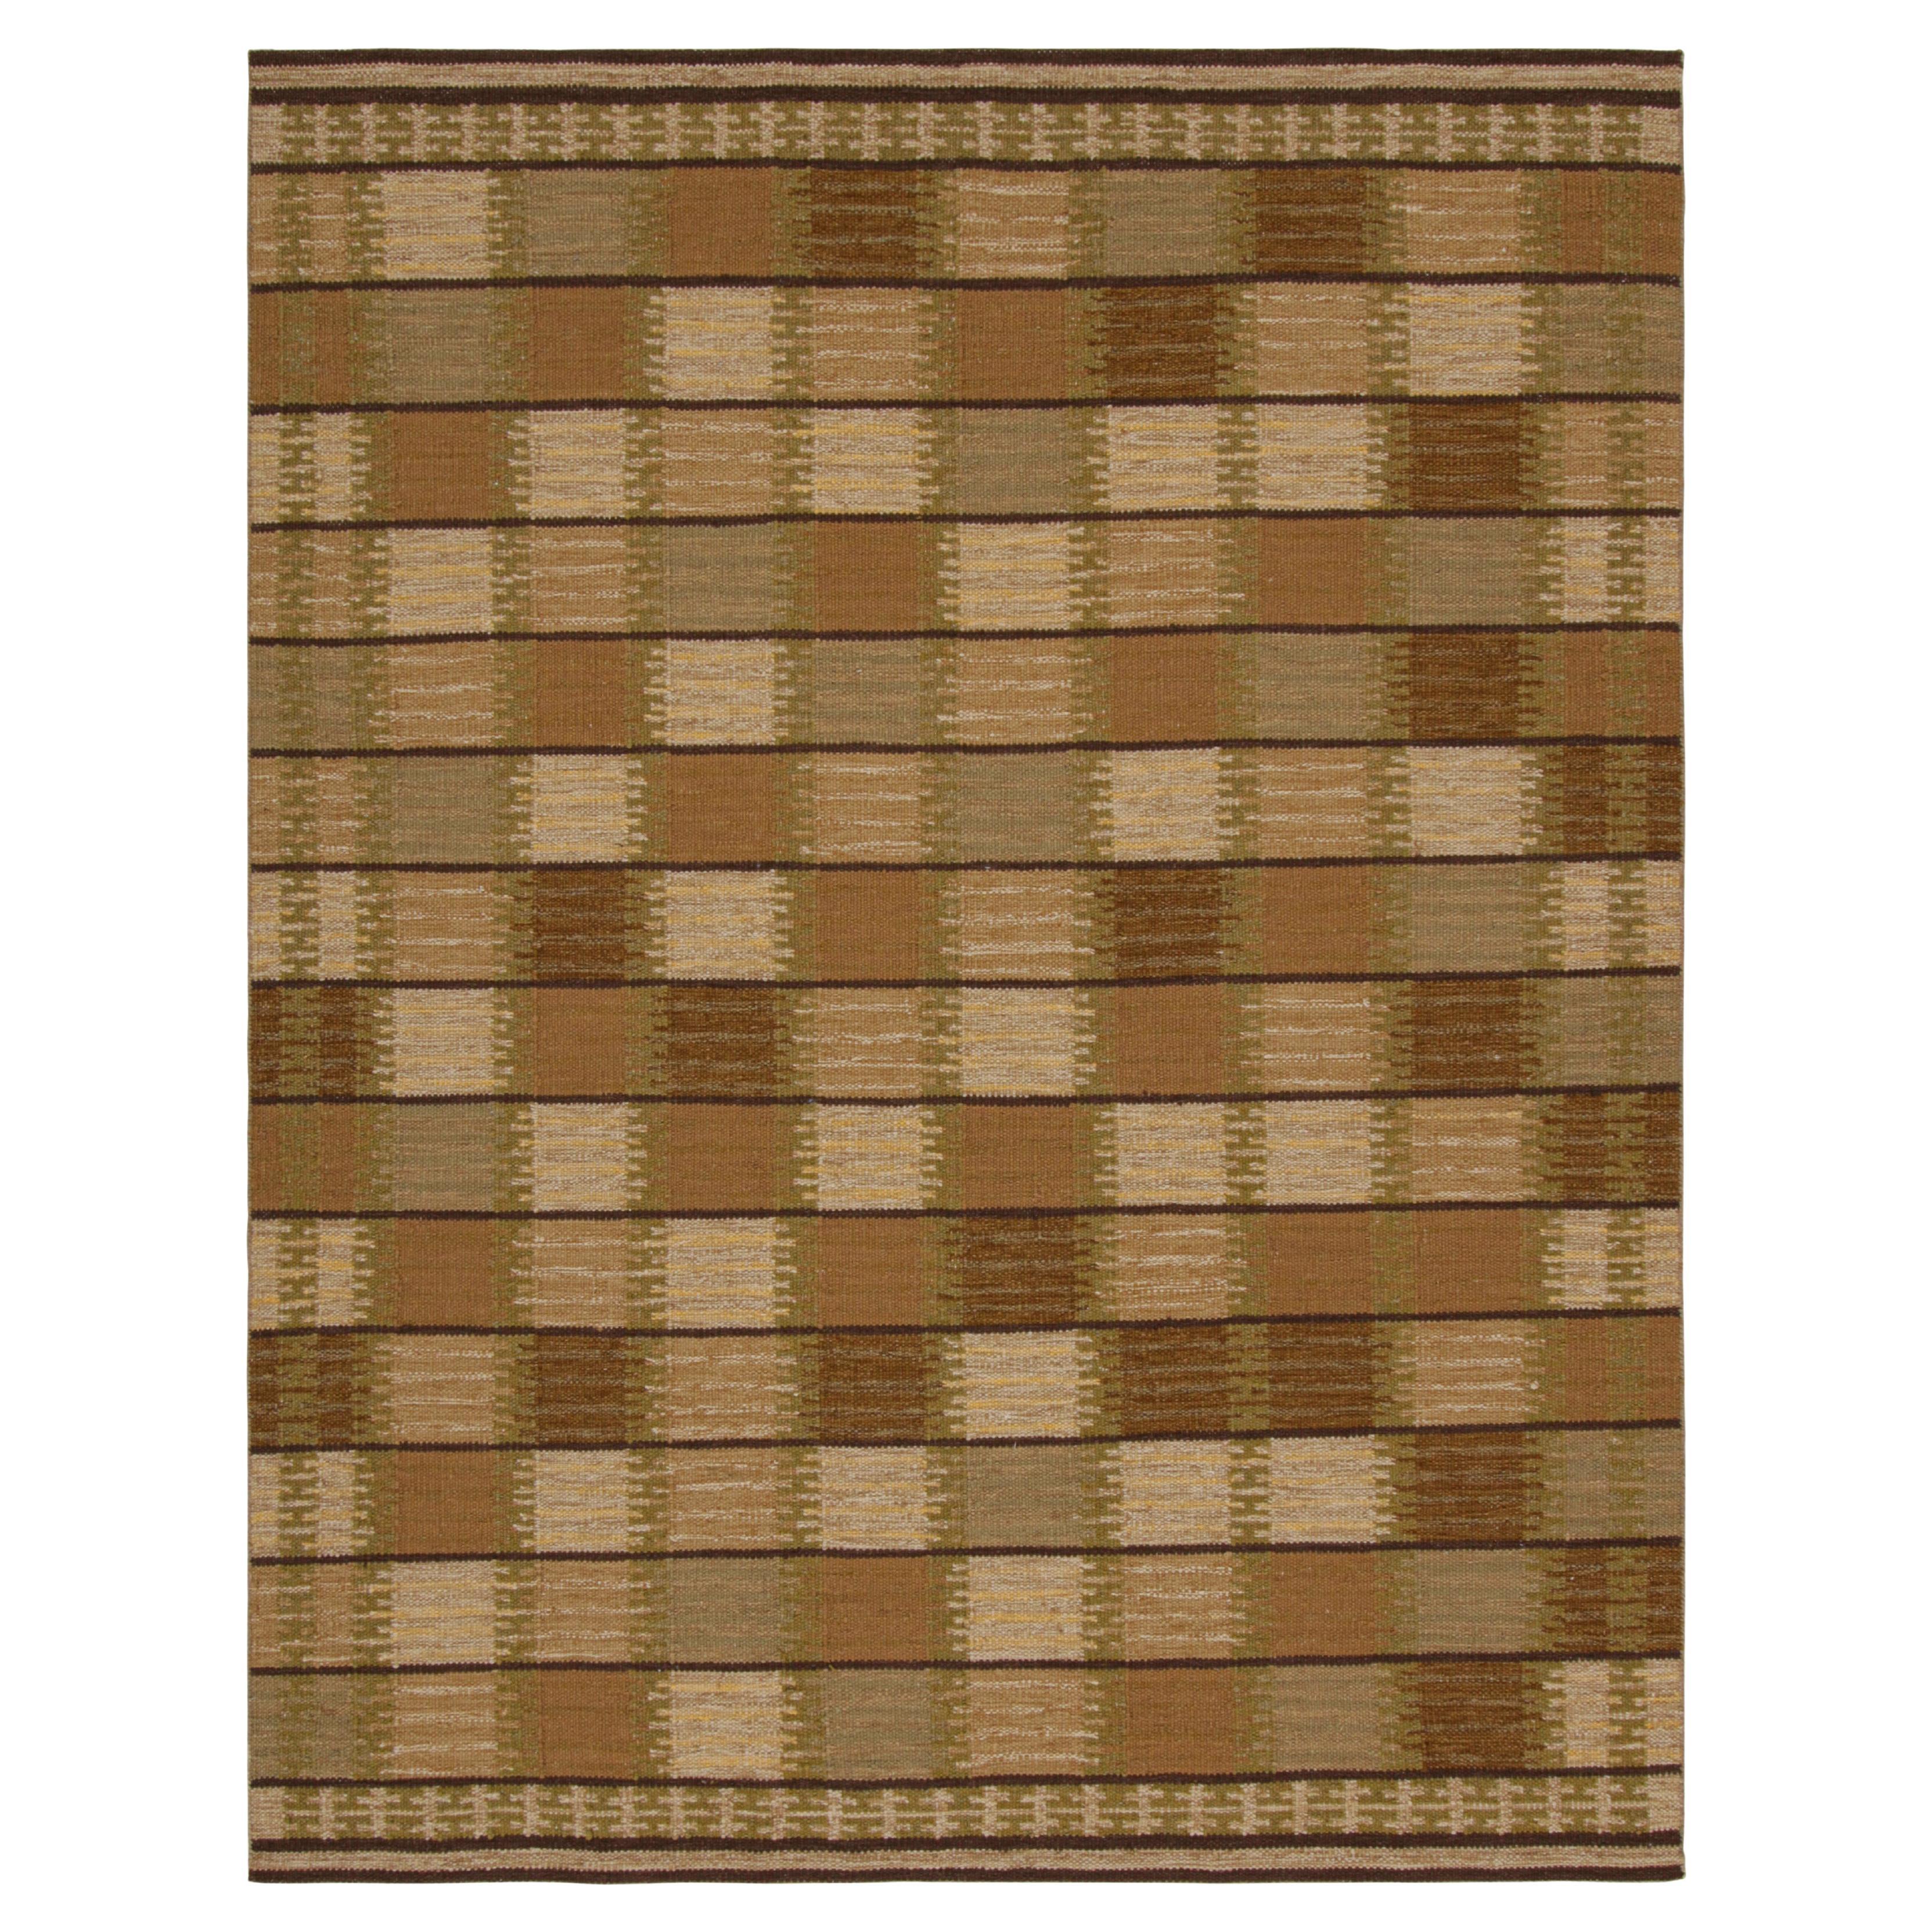 Rug & Kilim’s Scandinavian Style Rug with Brown and Beige Geometric Patterns 